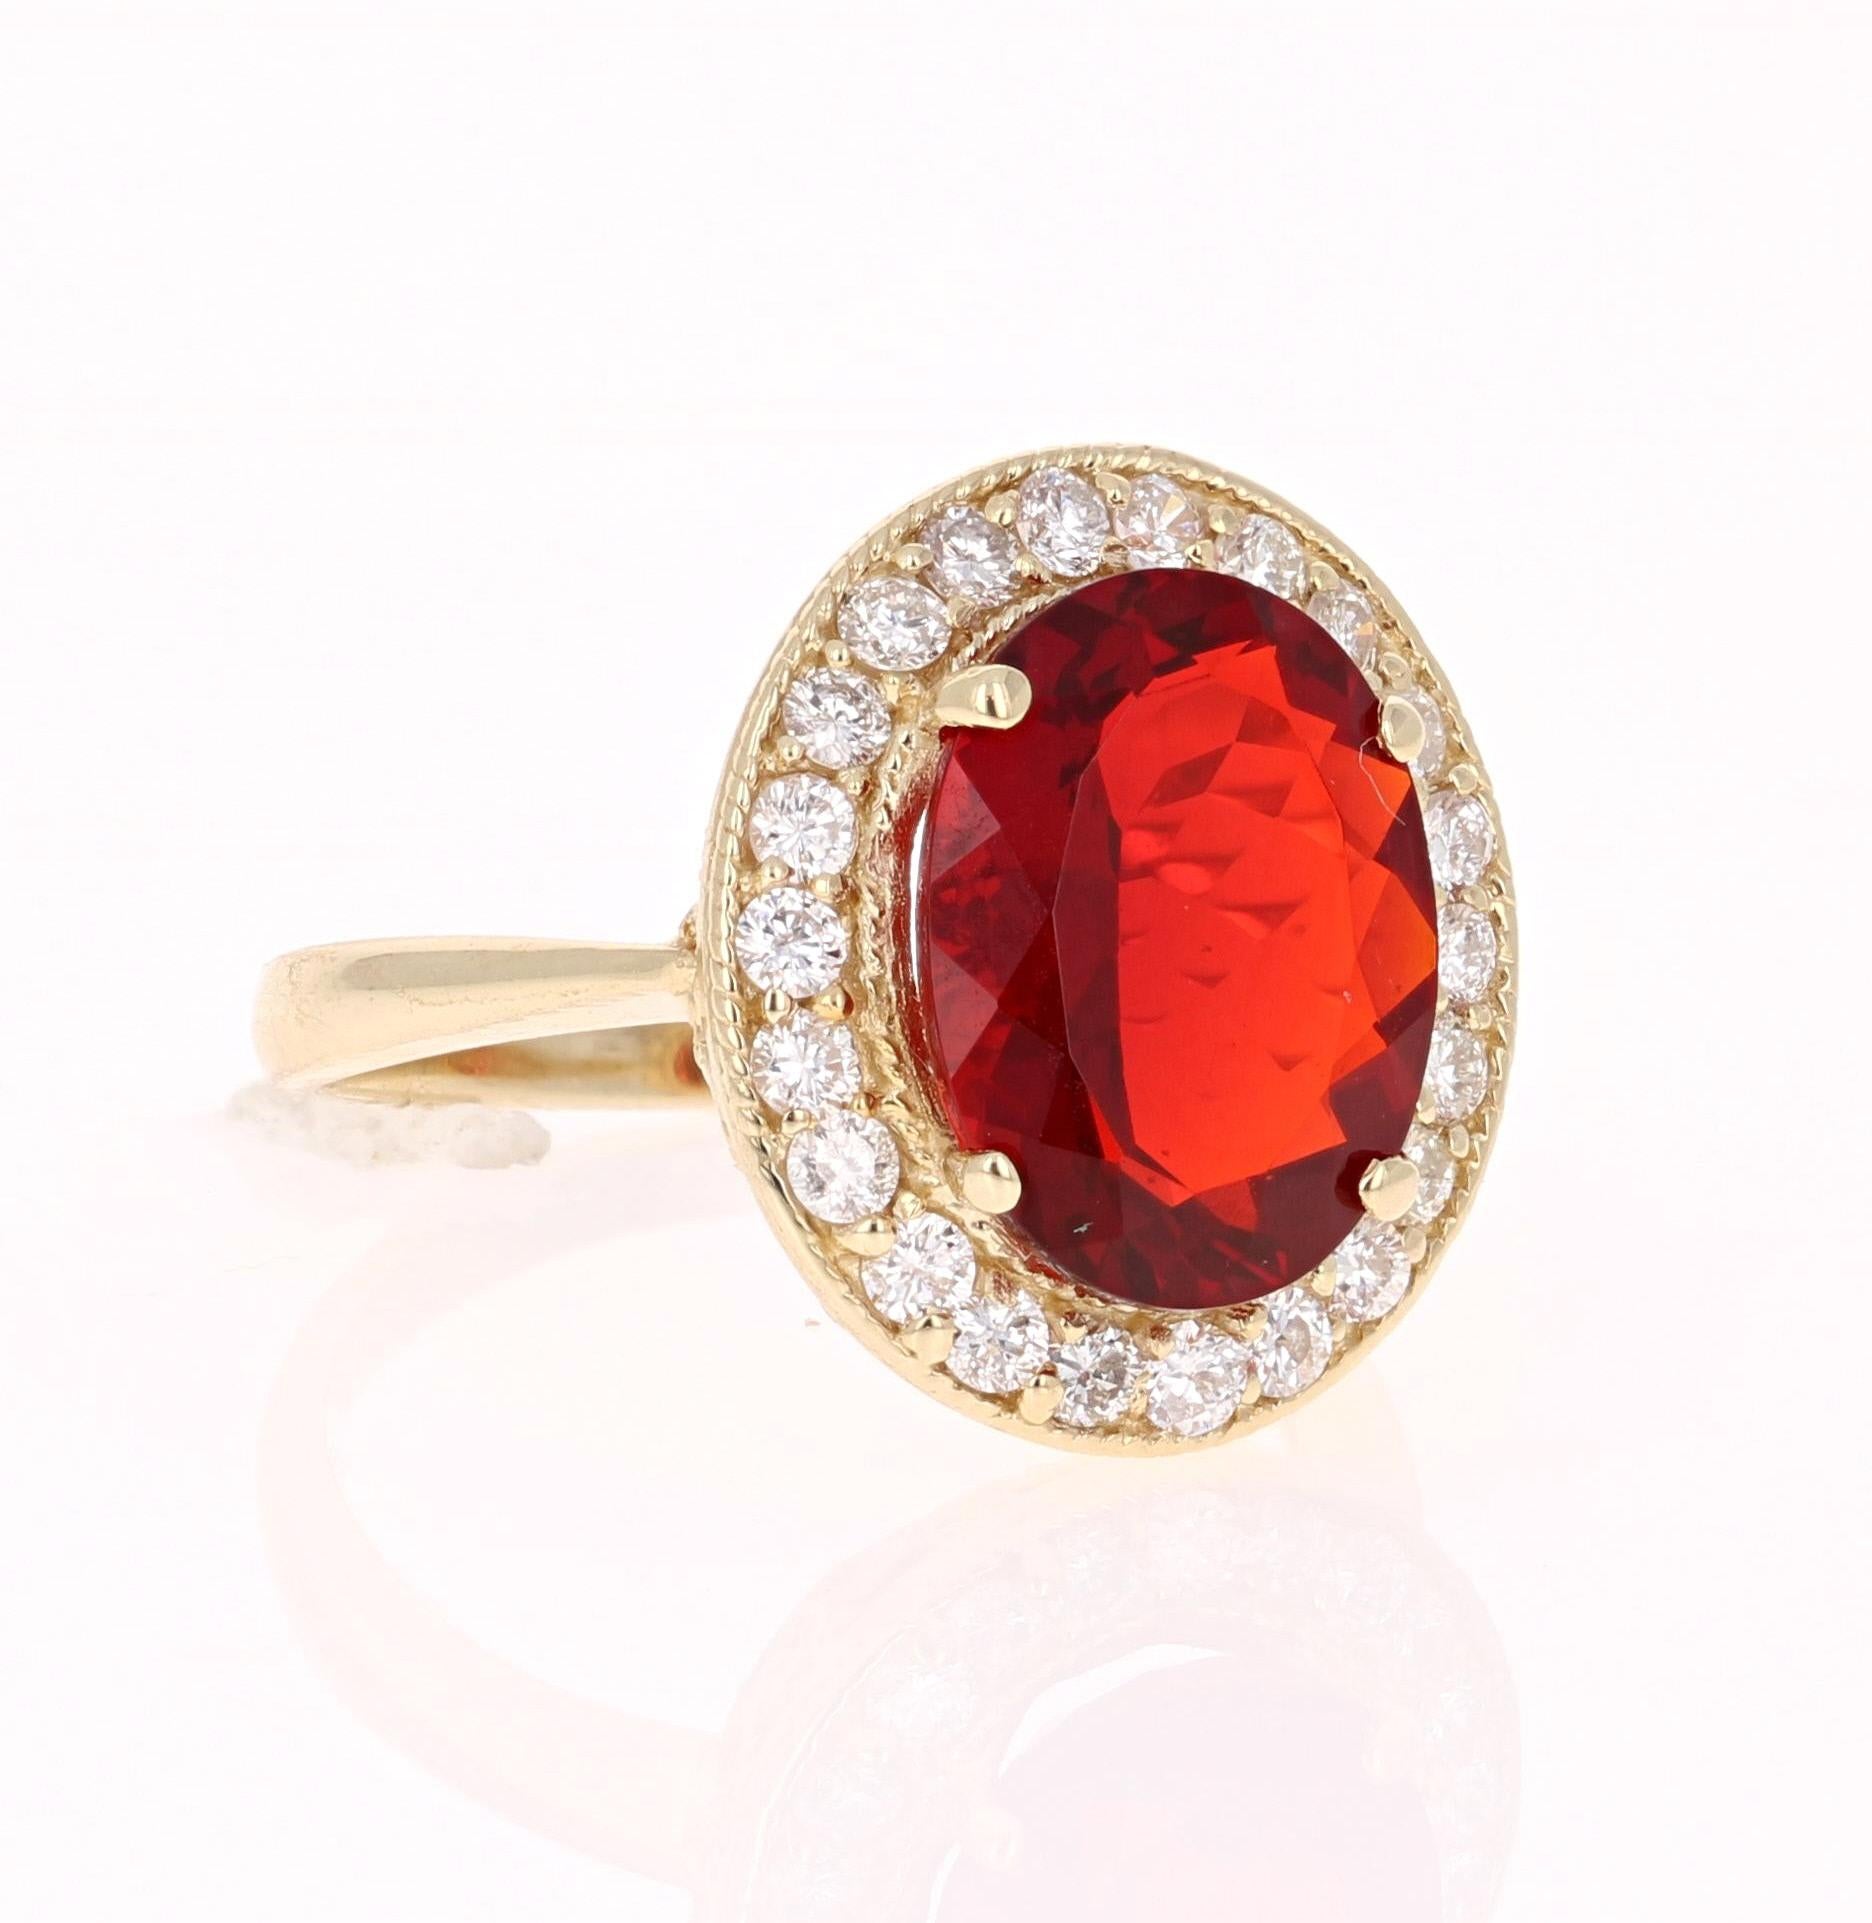 This gorgeous GIA Certified Cocktail ring has a beautiful Oval Cut Fire Opal that weighs 3.58 Carats and 22 Round Cut Diamonds that weigh 0.74 Carats. The Clarity and Color of the Diamonds are SI2-F.  The Total carat weight of the ring is 4.32